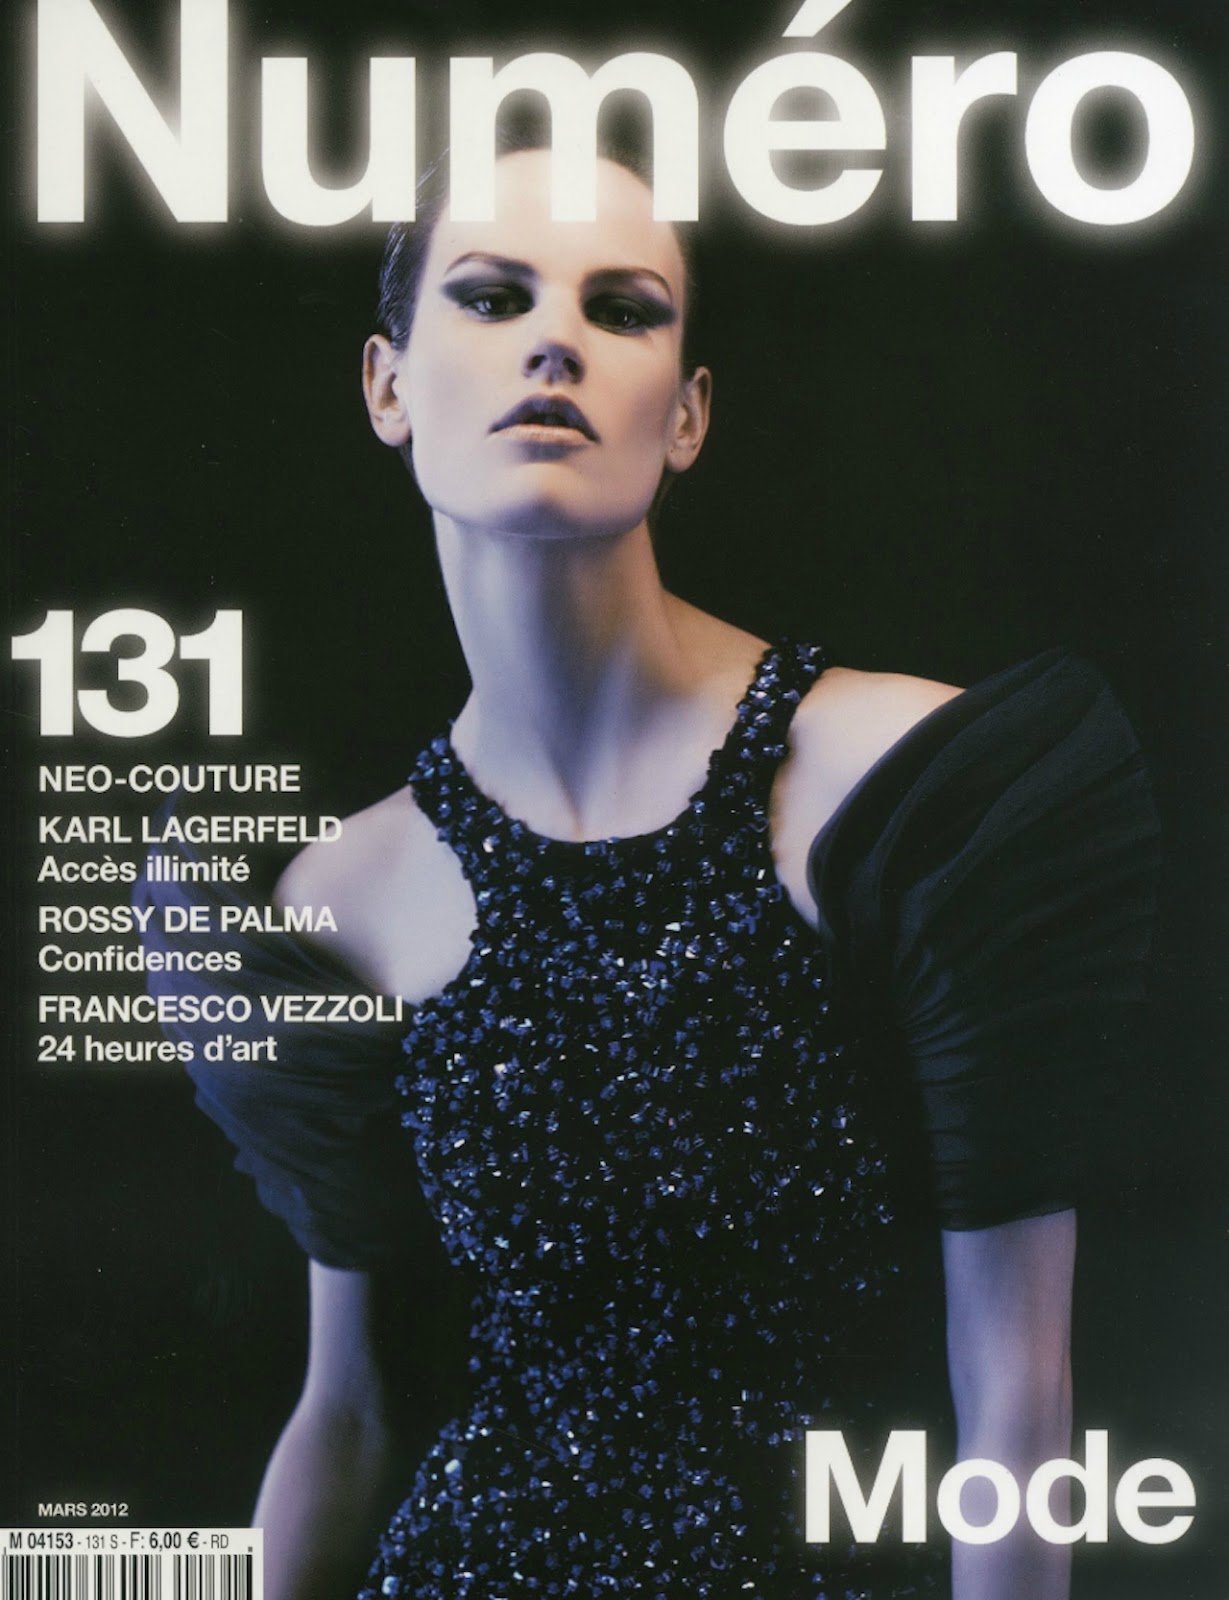 karlie+kloss,+saskia+de+brauw,+aymeline+valade,+lindsey+wixson+and+daria+strokous+by+karl+lagerfeld+for+numero+march+2012-1.jpg